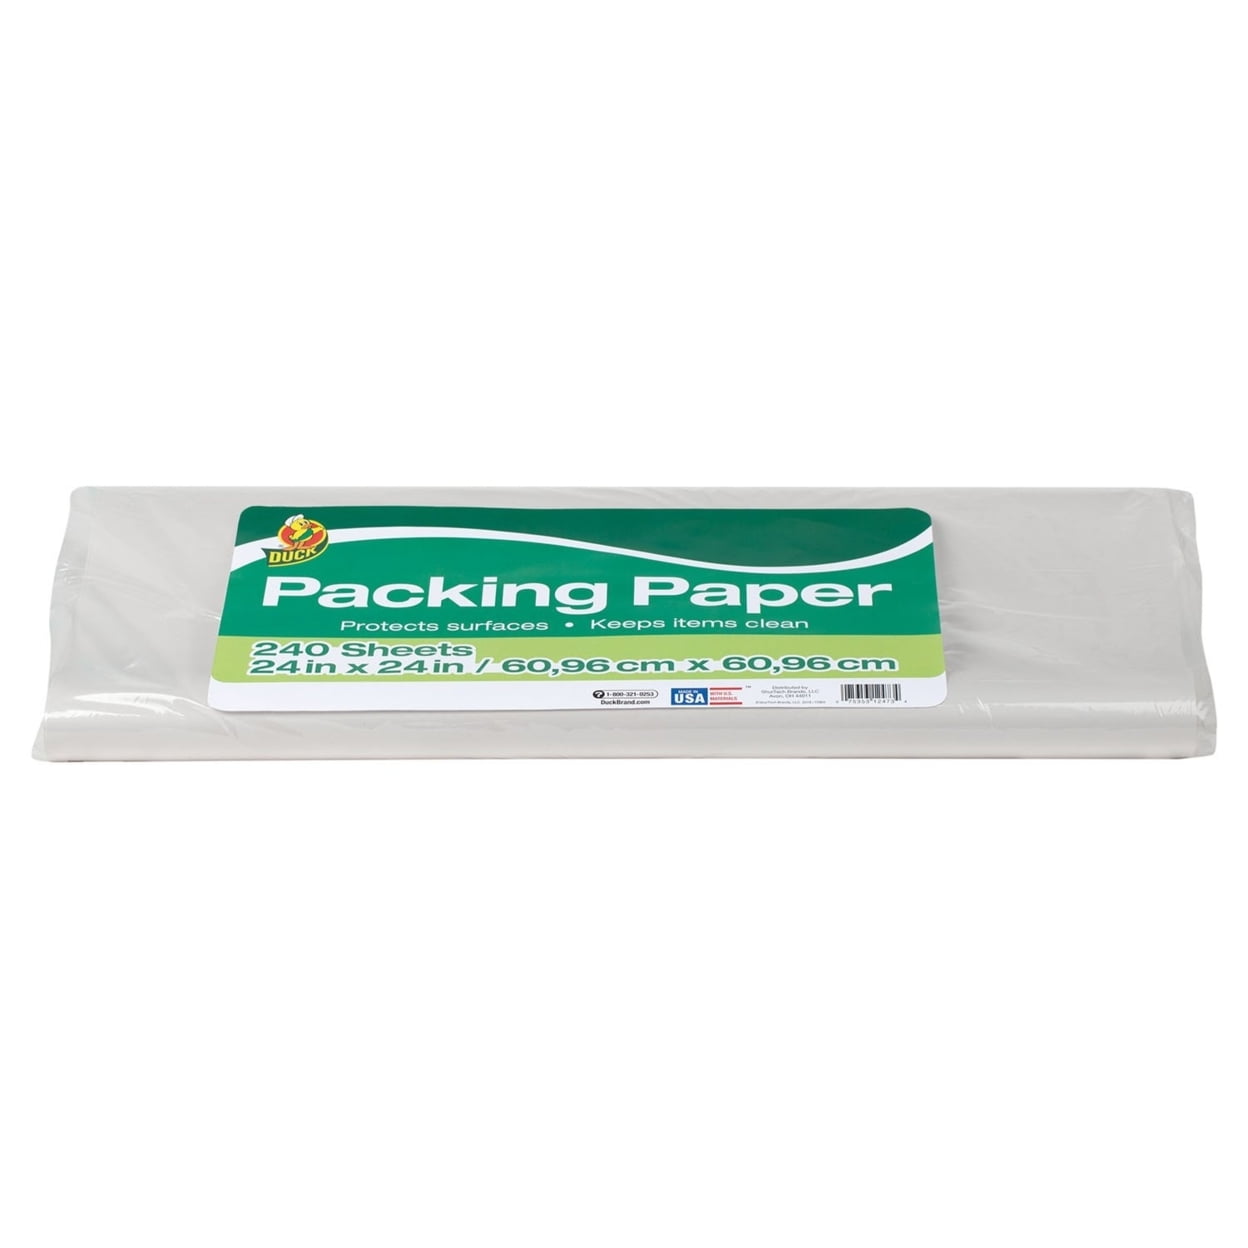  Corrugated Packing Paper 28 X 22 25 Sheets